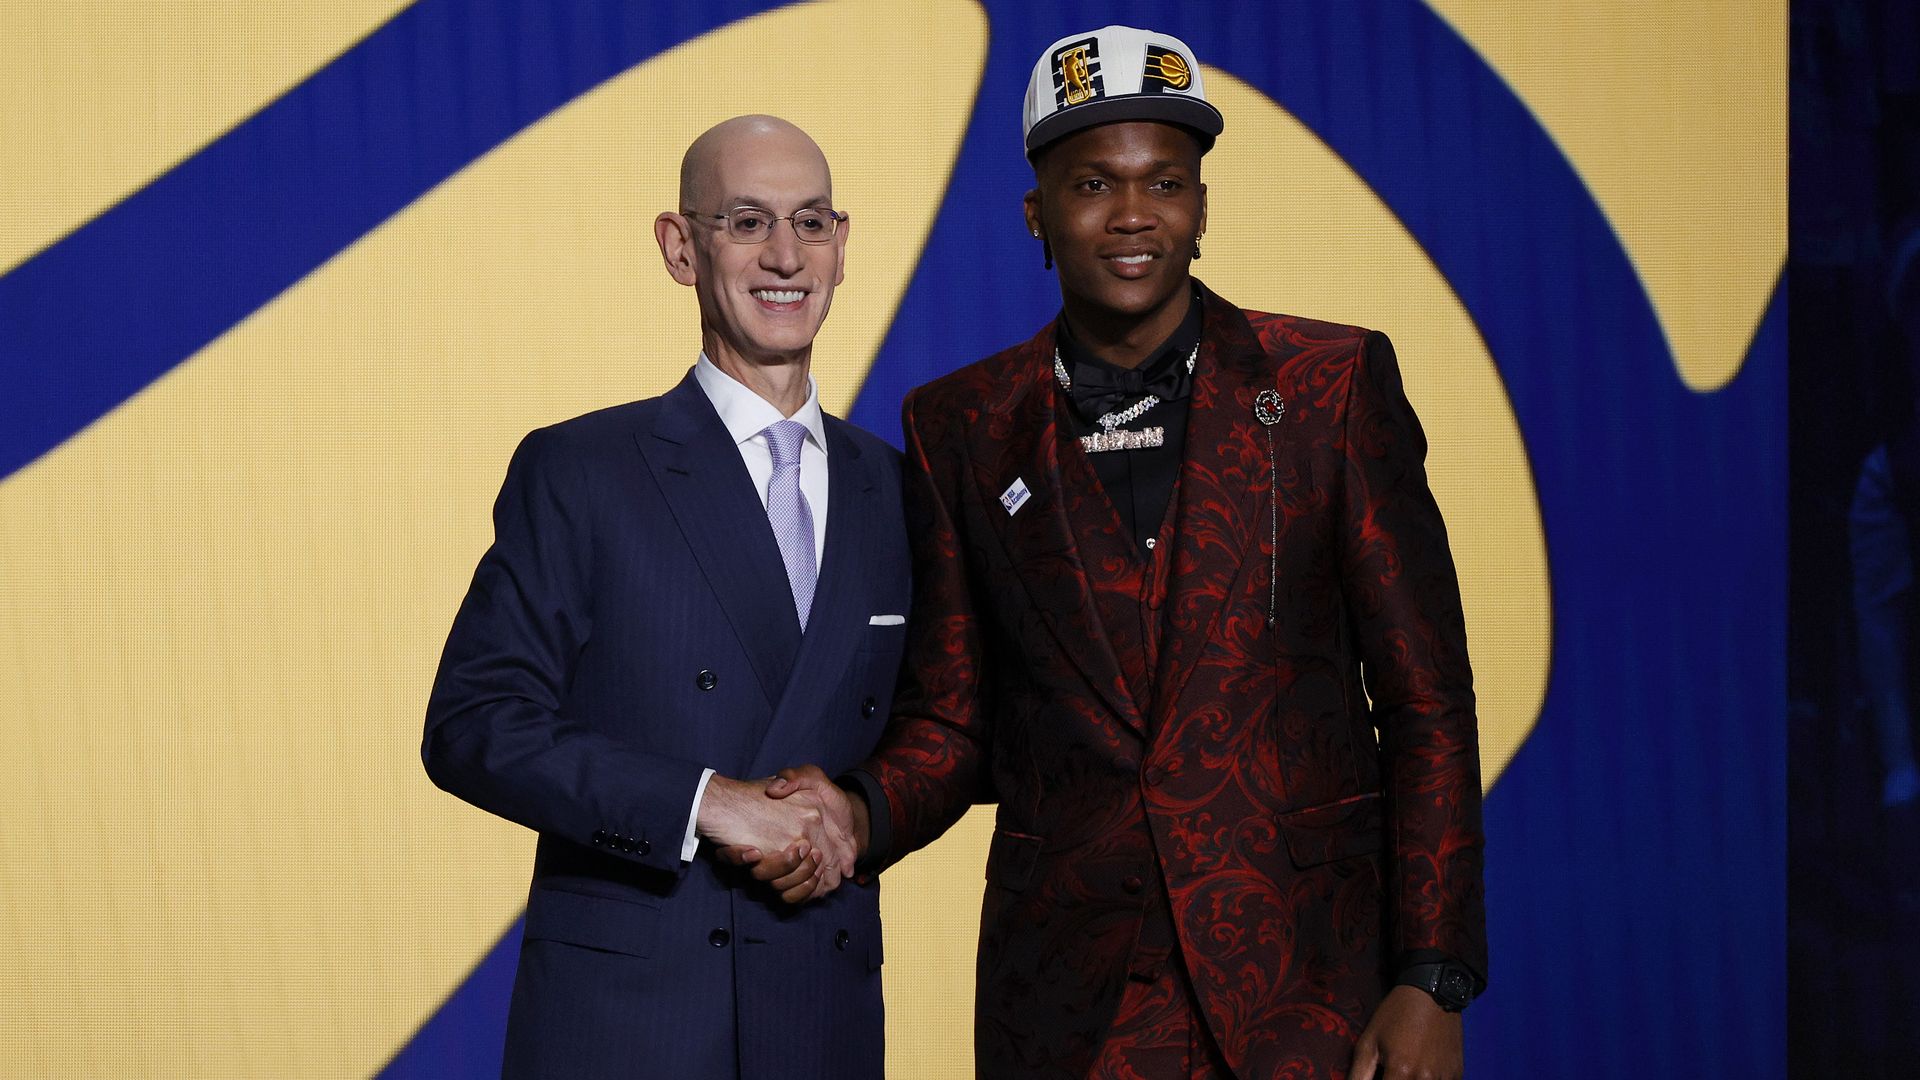 NBA commissioner shaking hands with a player during the draft.